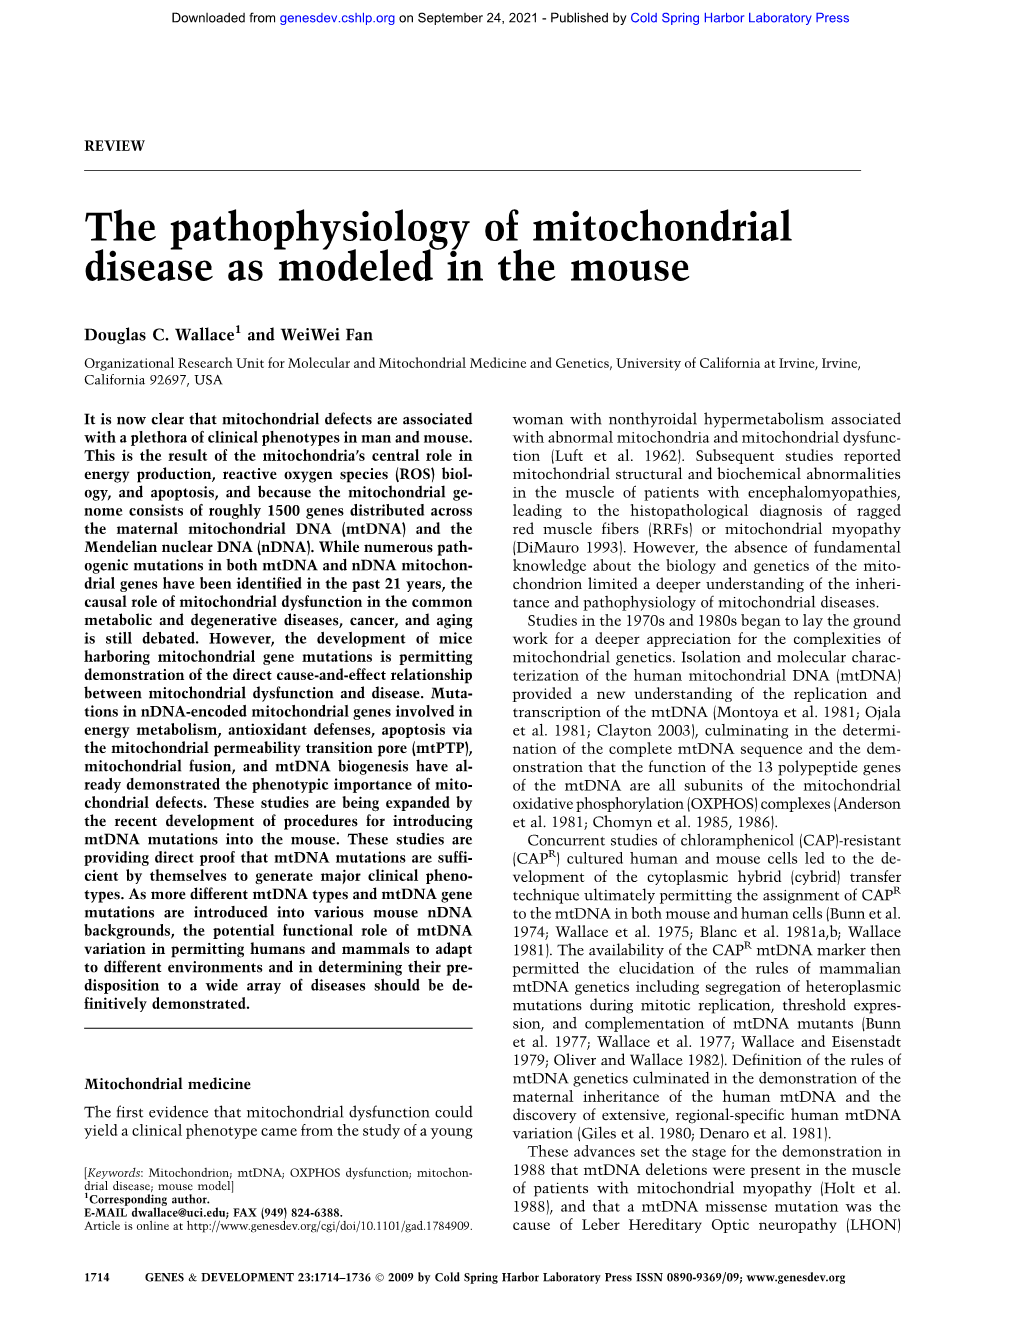 The Pathophysiology of Mitochondrial Disease As Modeled in the Mouse